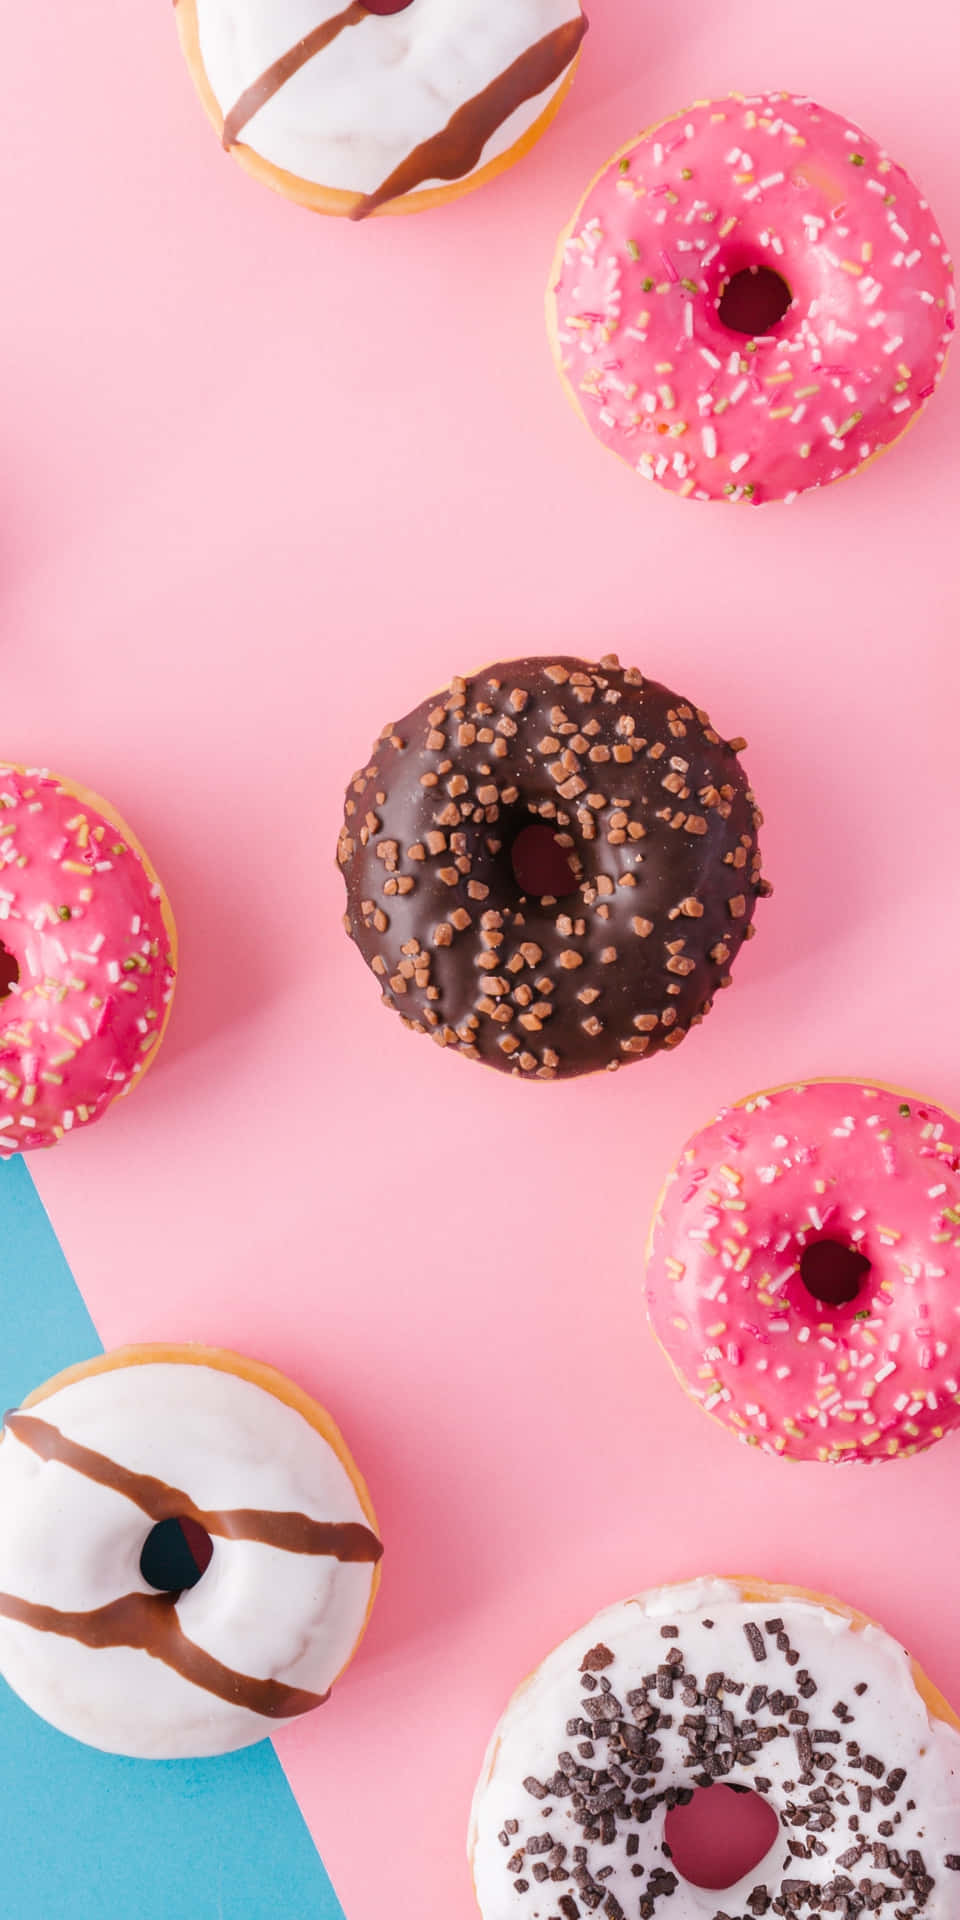 A Group Of Donuts On A Pink And Blue Background